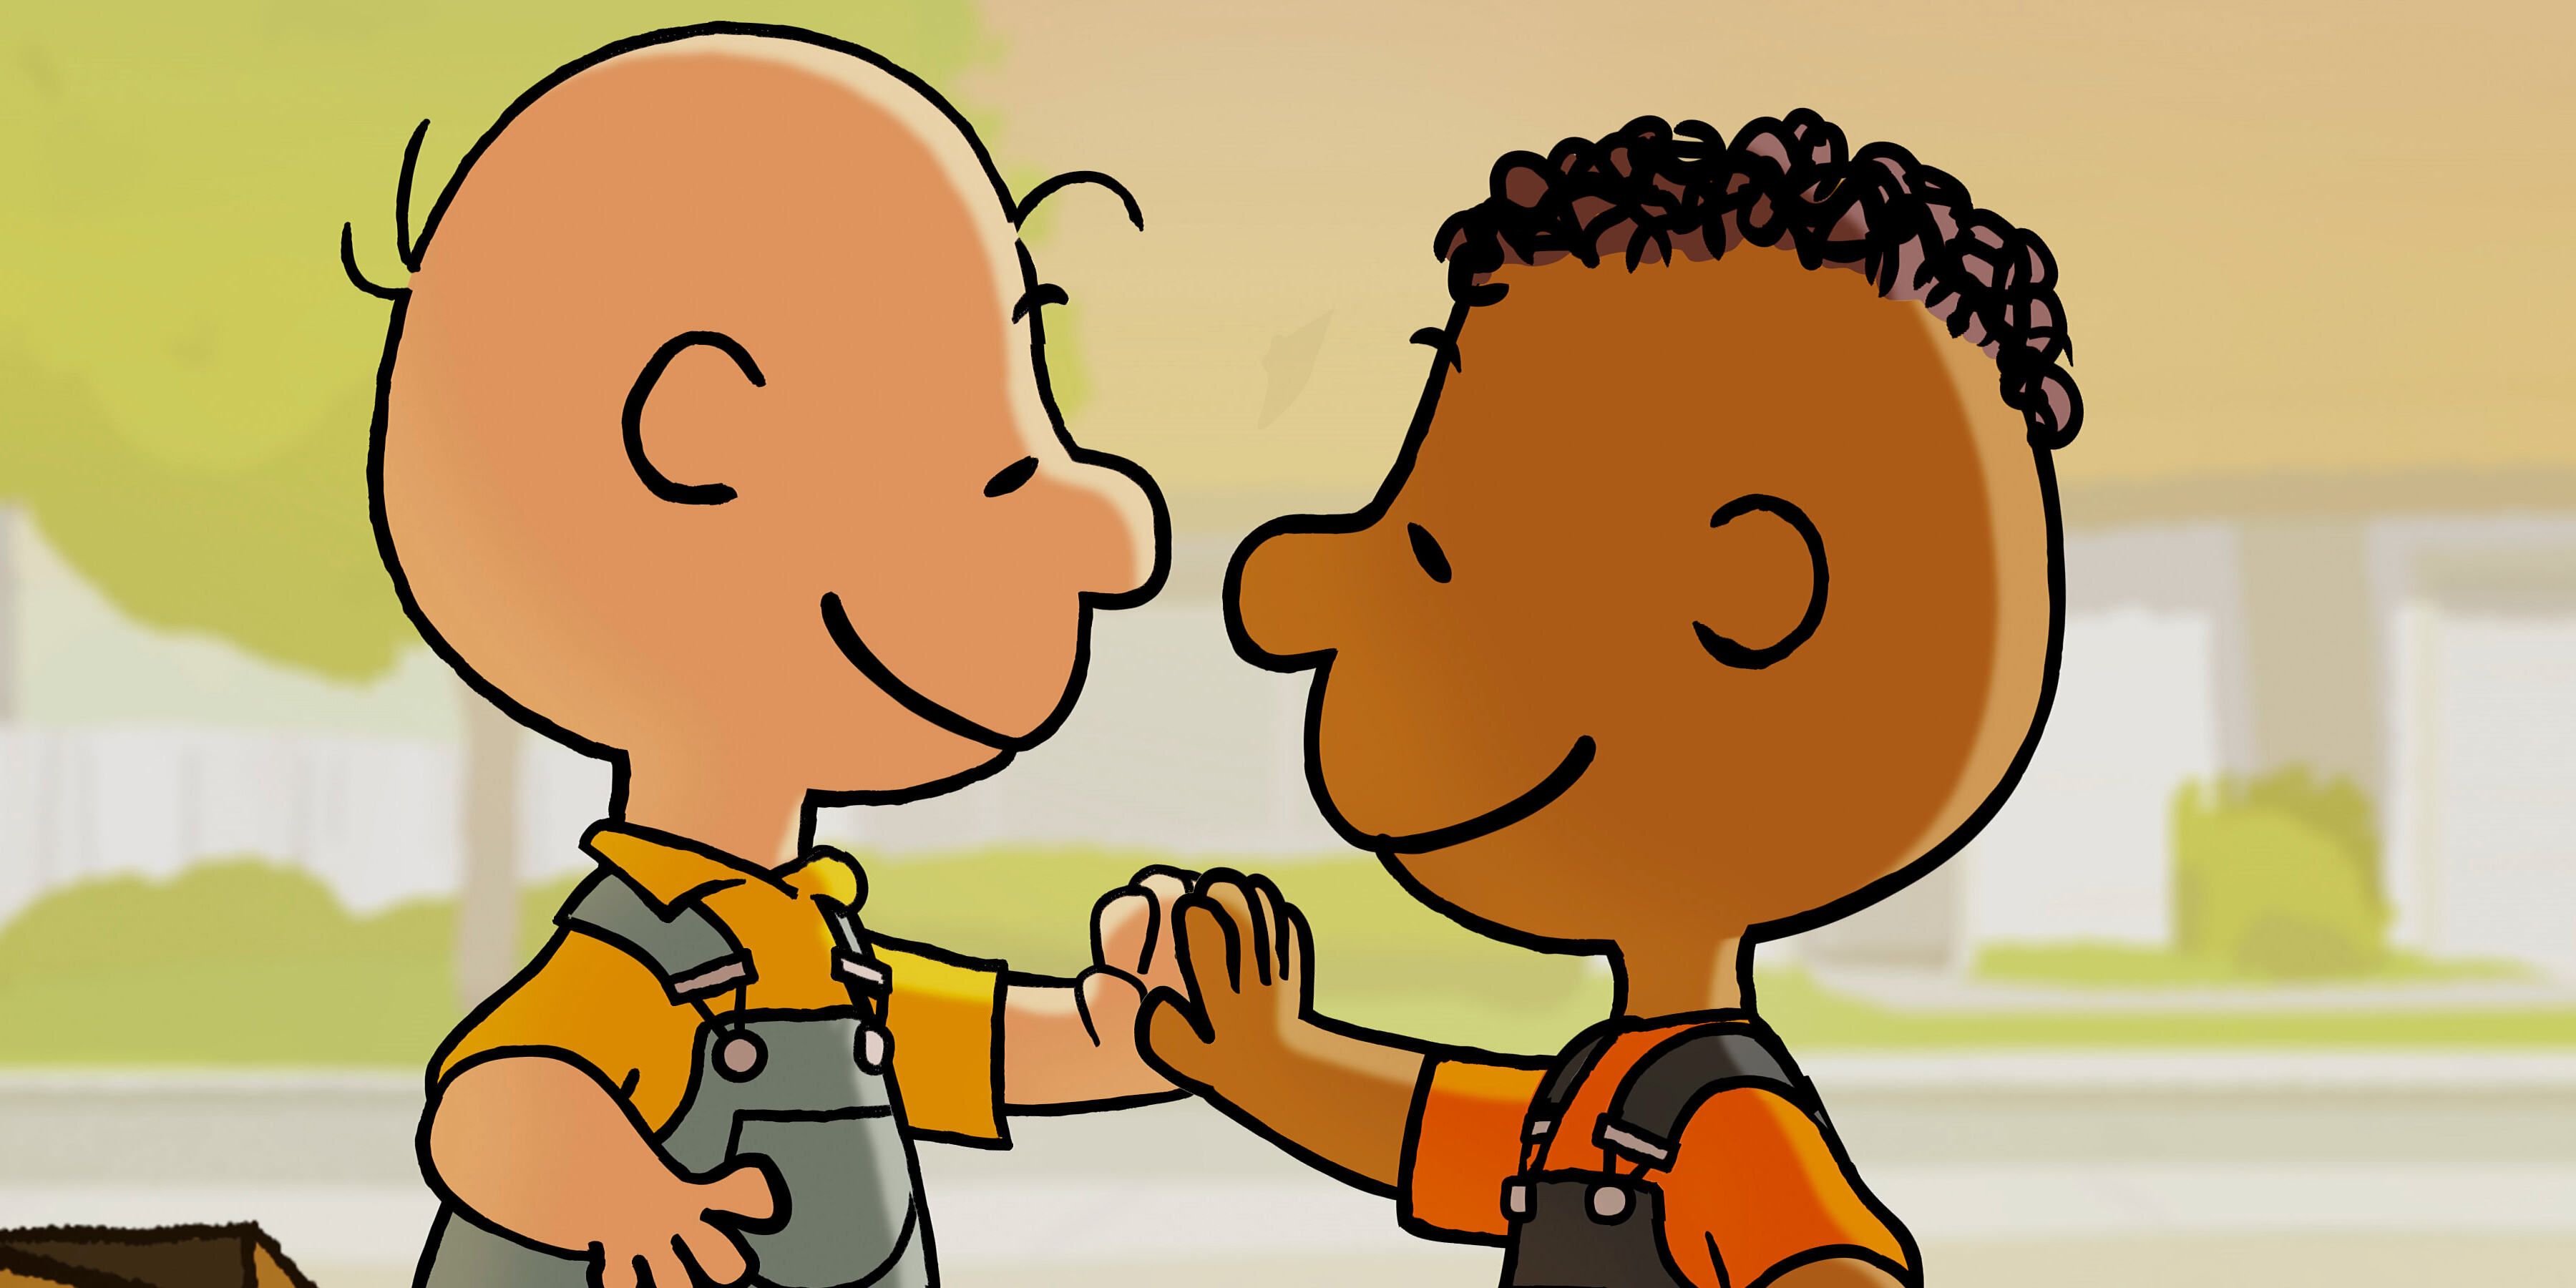 Charlie Brown and Franklin give each other a high five in Snoopy Presents: Welcome Home, Franklin